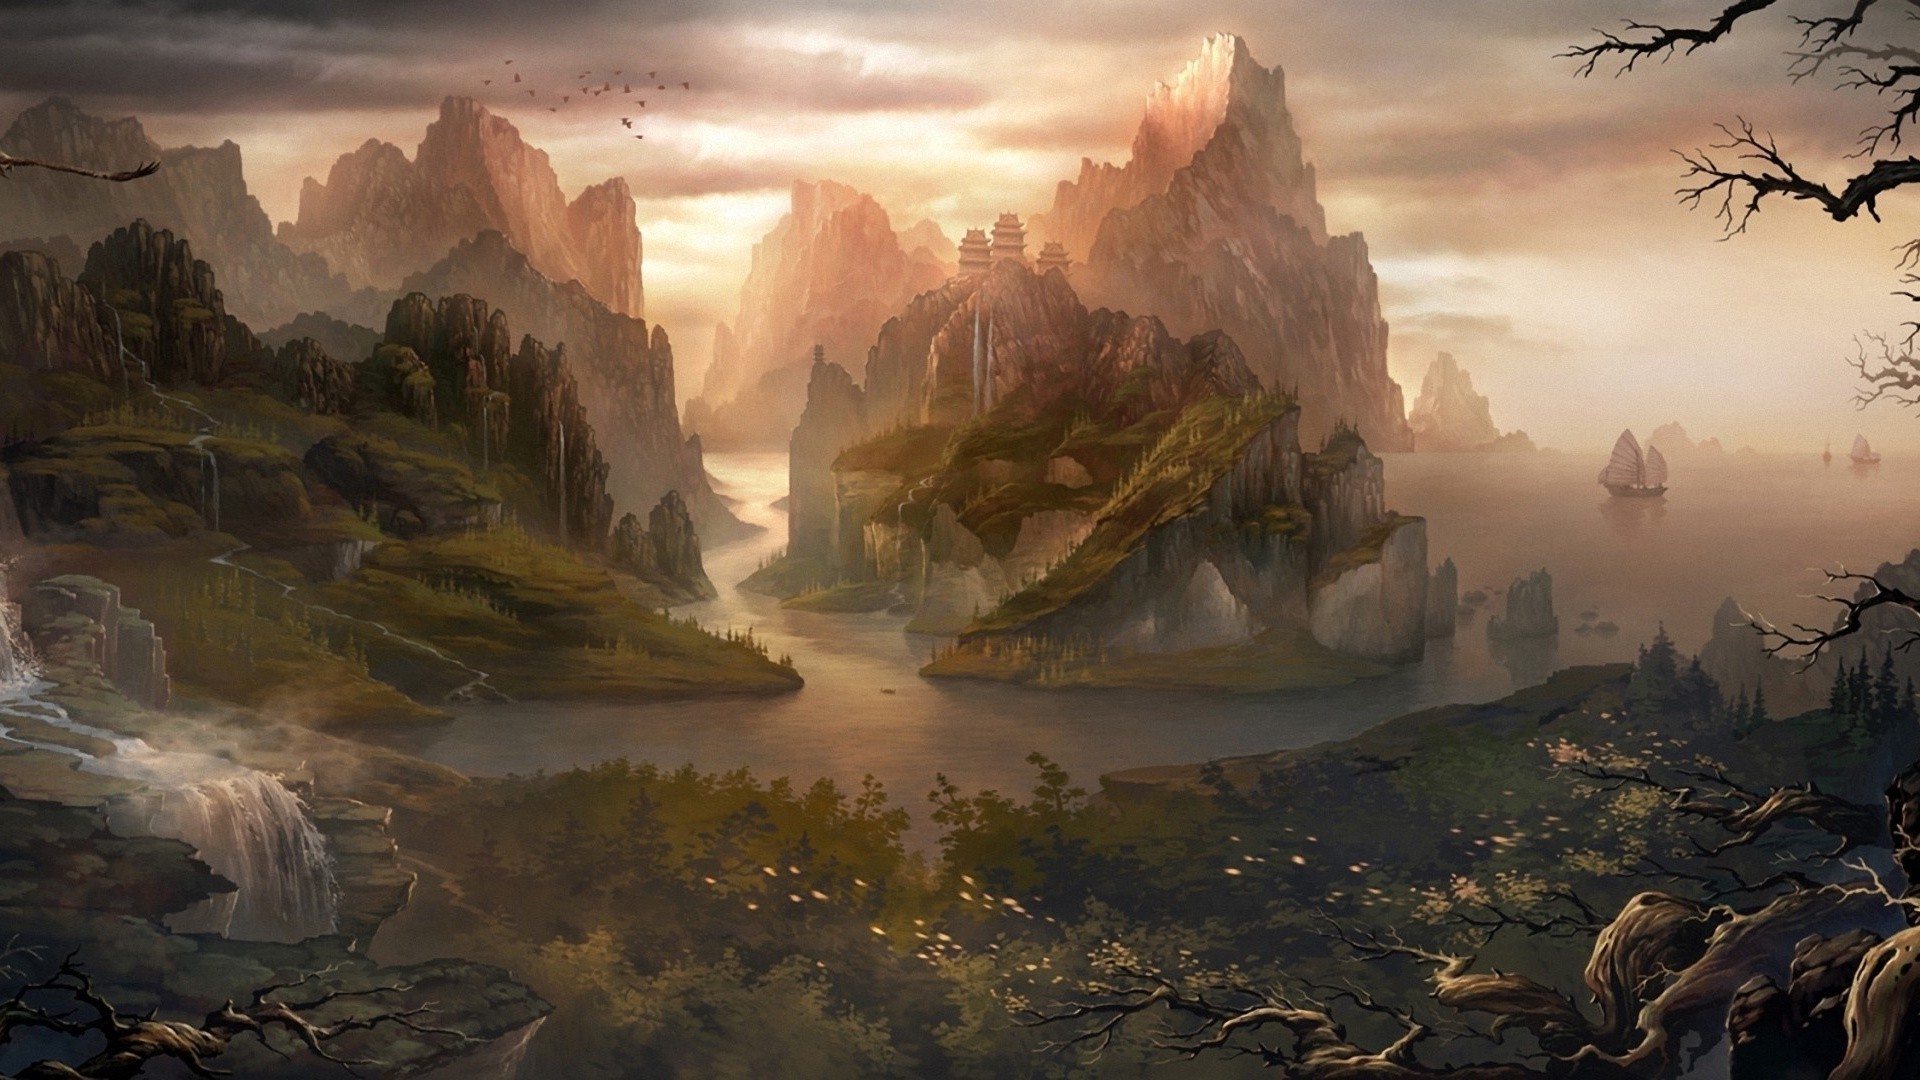 1920x1080 fantasy-landscape-wallpapers-hd-5 | Hero's Odyssey | Pinterest | Landscape  wallpaper, Fantasy landscape and Wallpaper